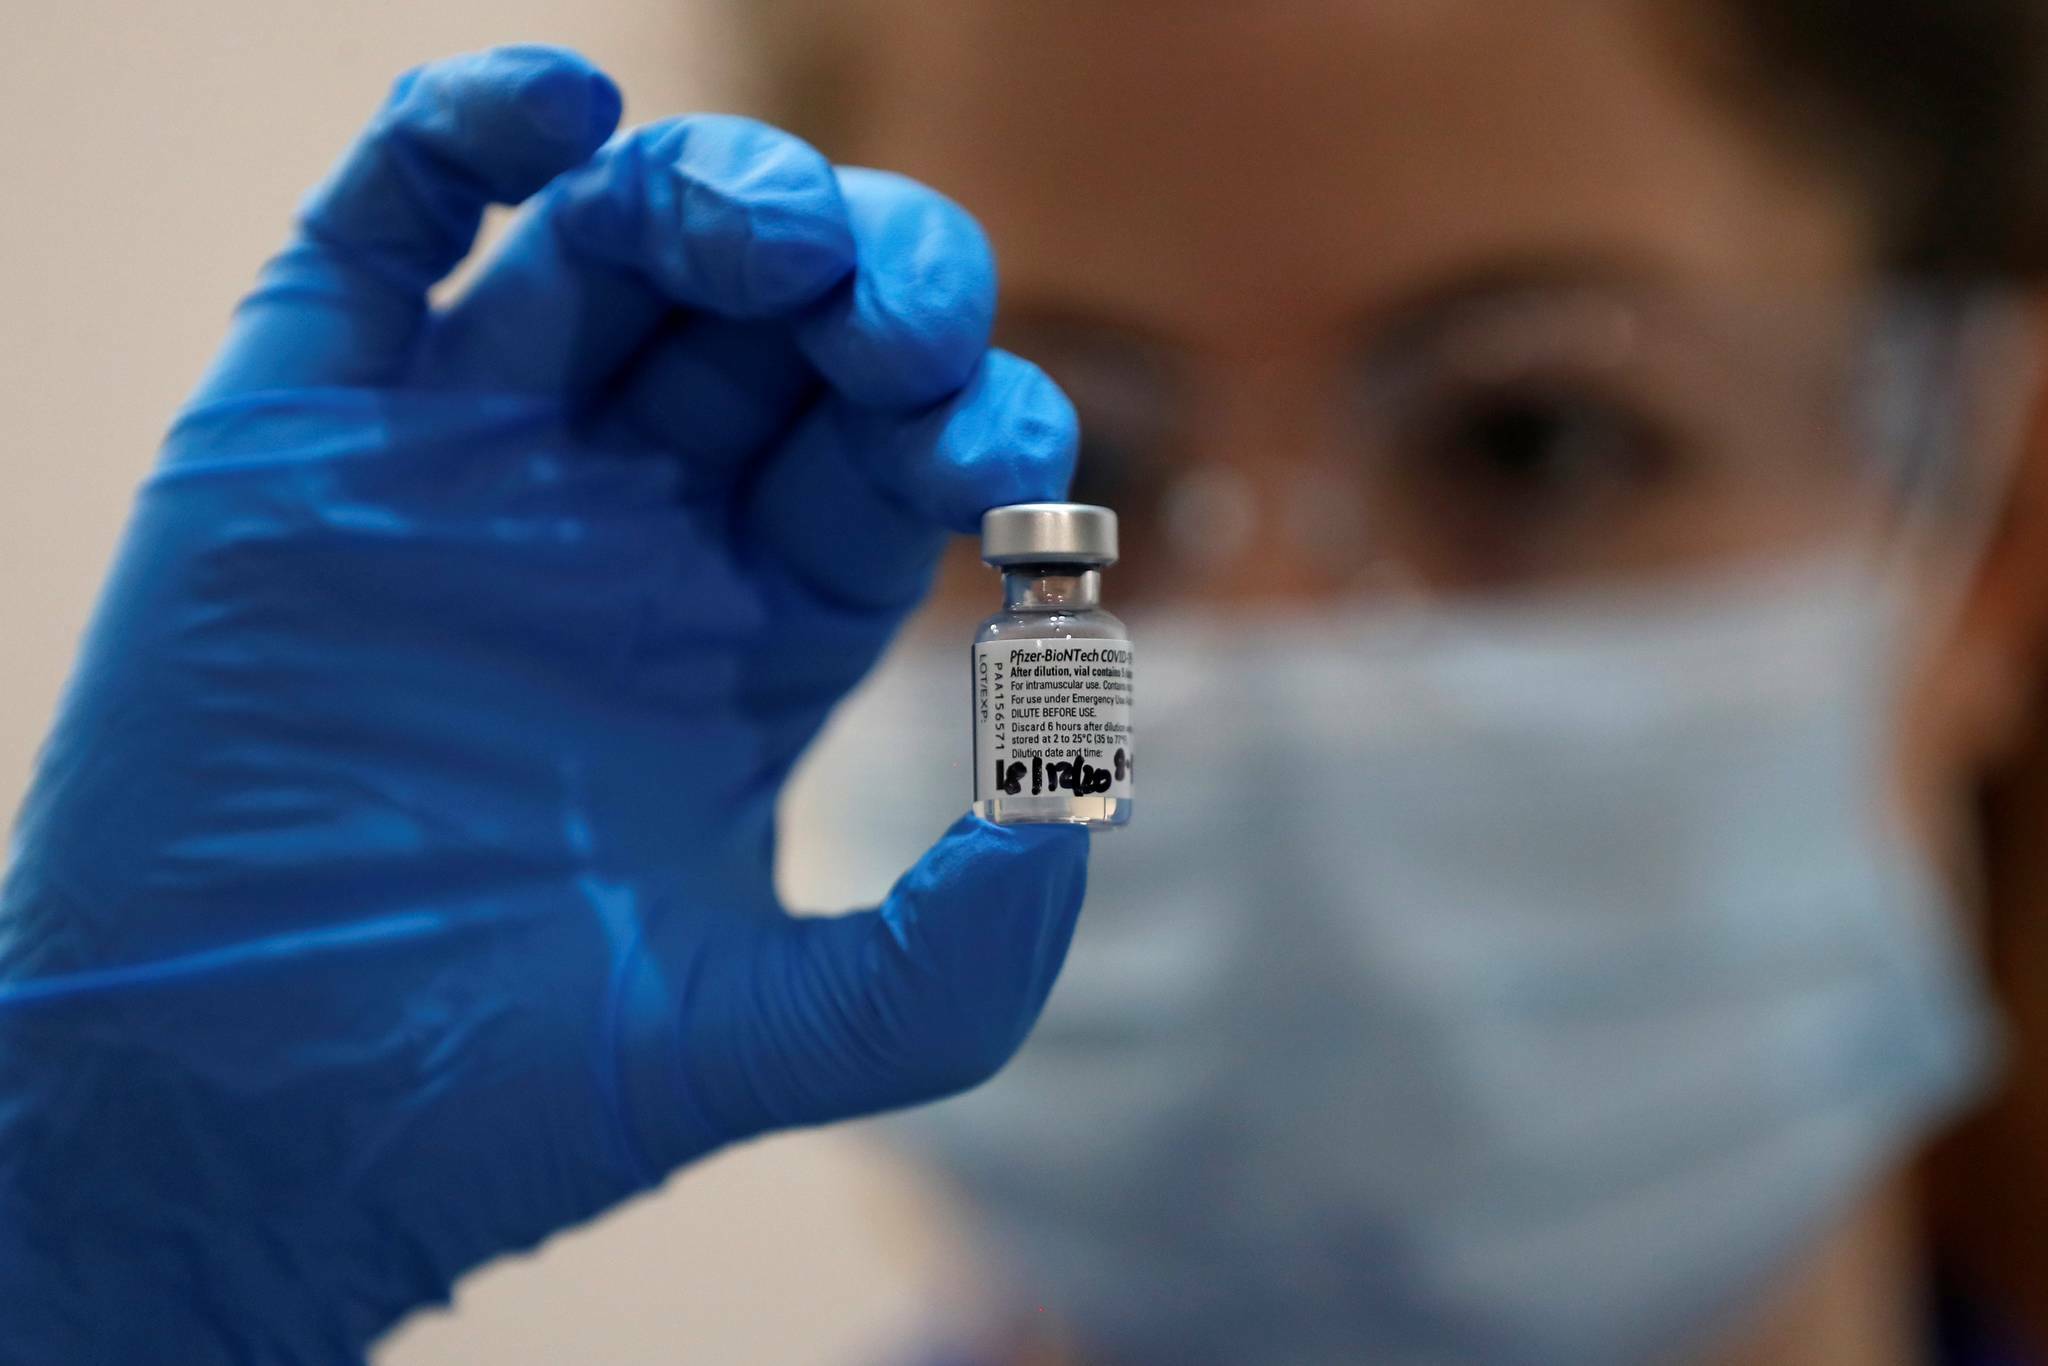 A bill aimed at helping Alaska’s hospitals died Monday after provisions were added by lawmakers barring vaccine mandates. In this file photo, a nurse holds a phial of the Pfizer-BioNTech COVID-19 vaccine at Guy’s Hospital in London, Tuesday, Dec. 8, 2020. (AP Photo/Frank Augstein, Pool)